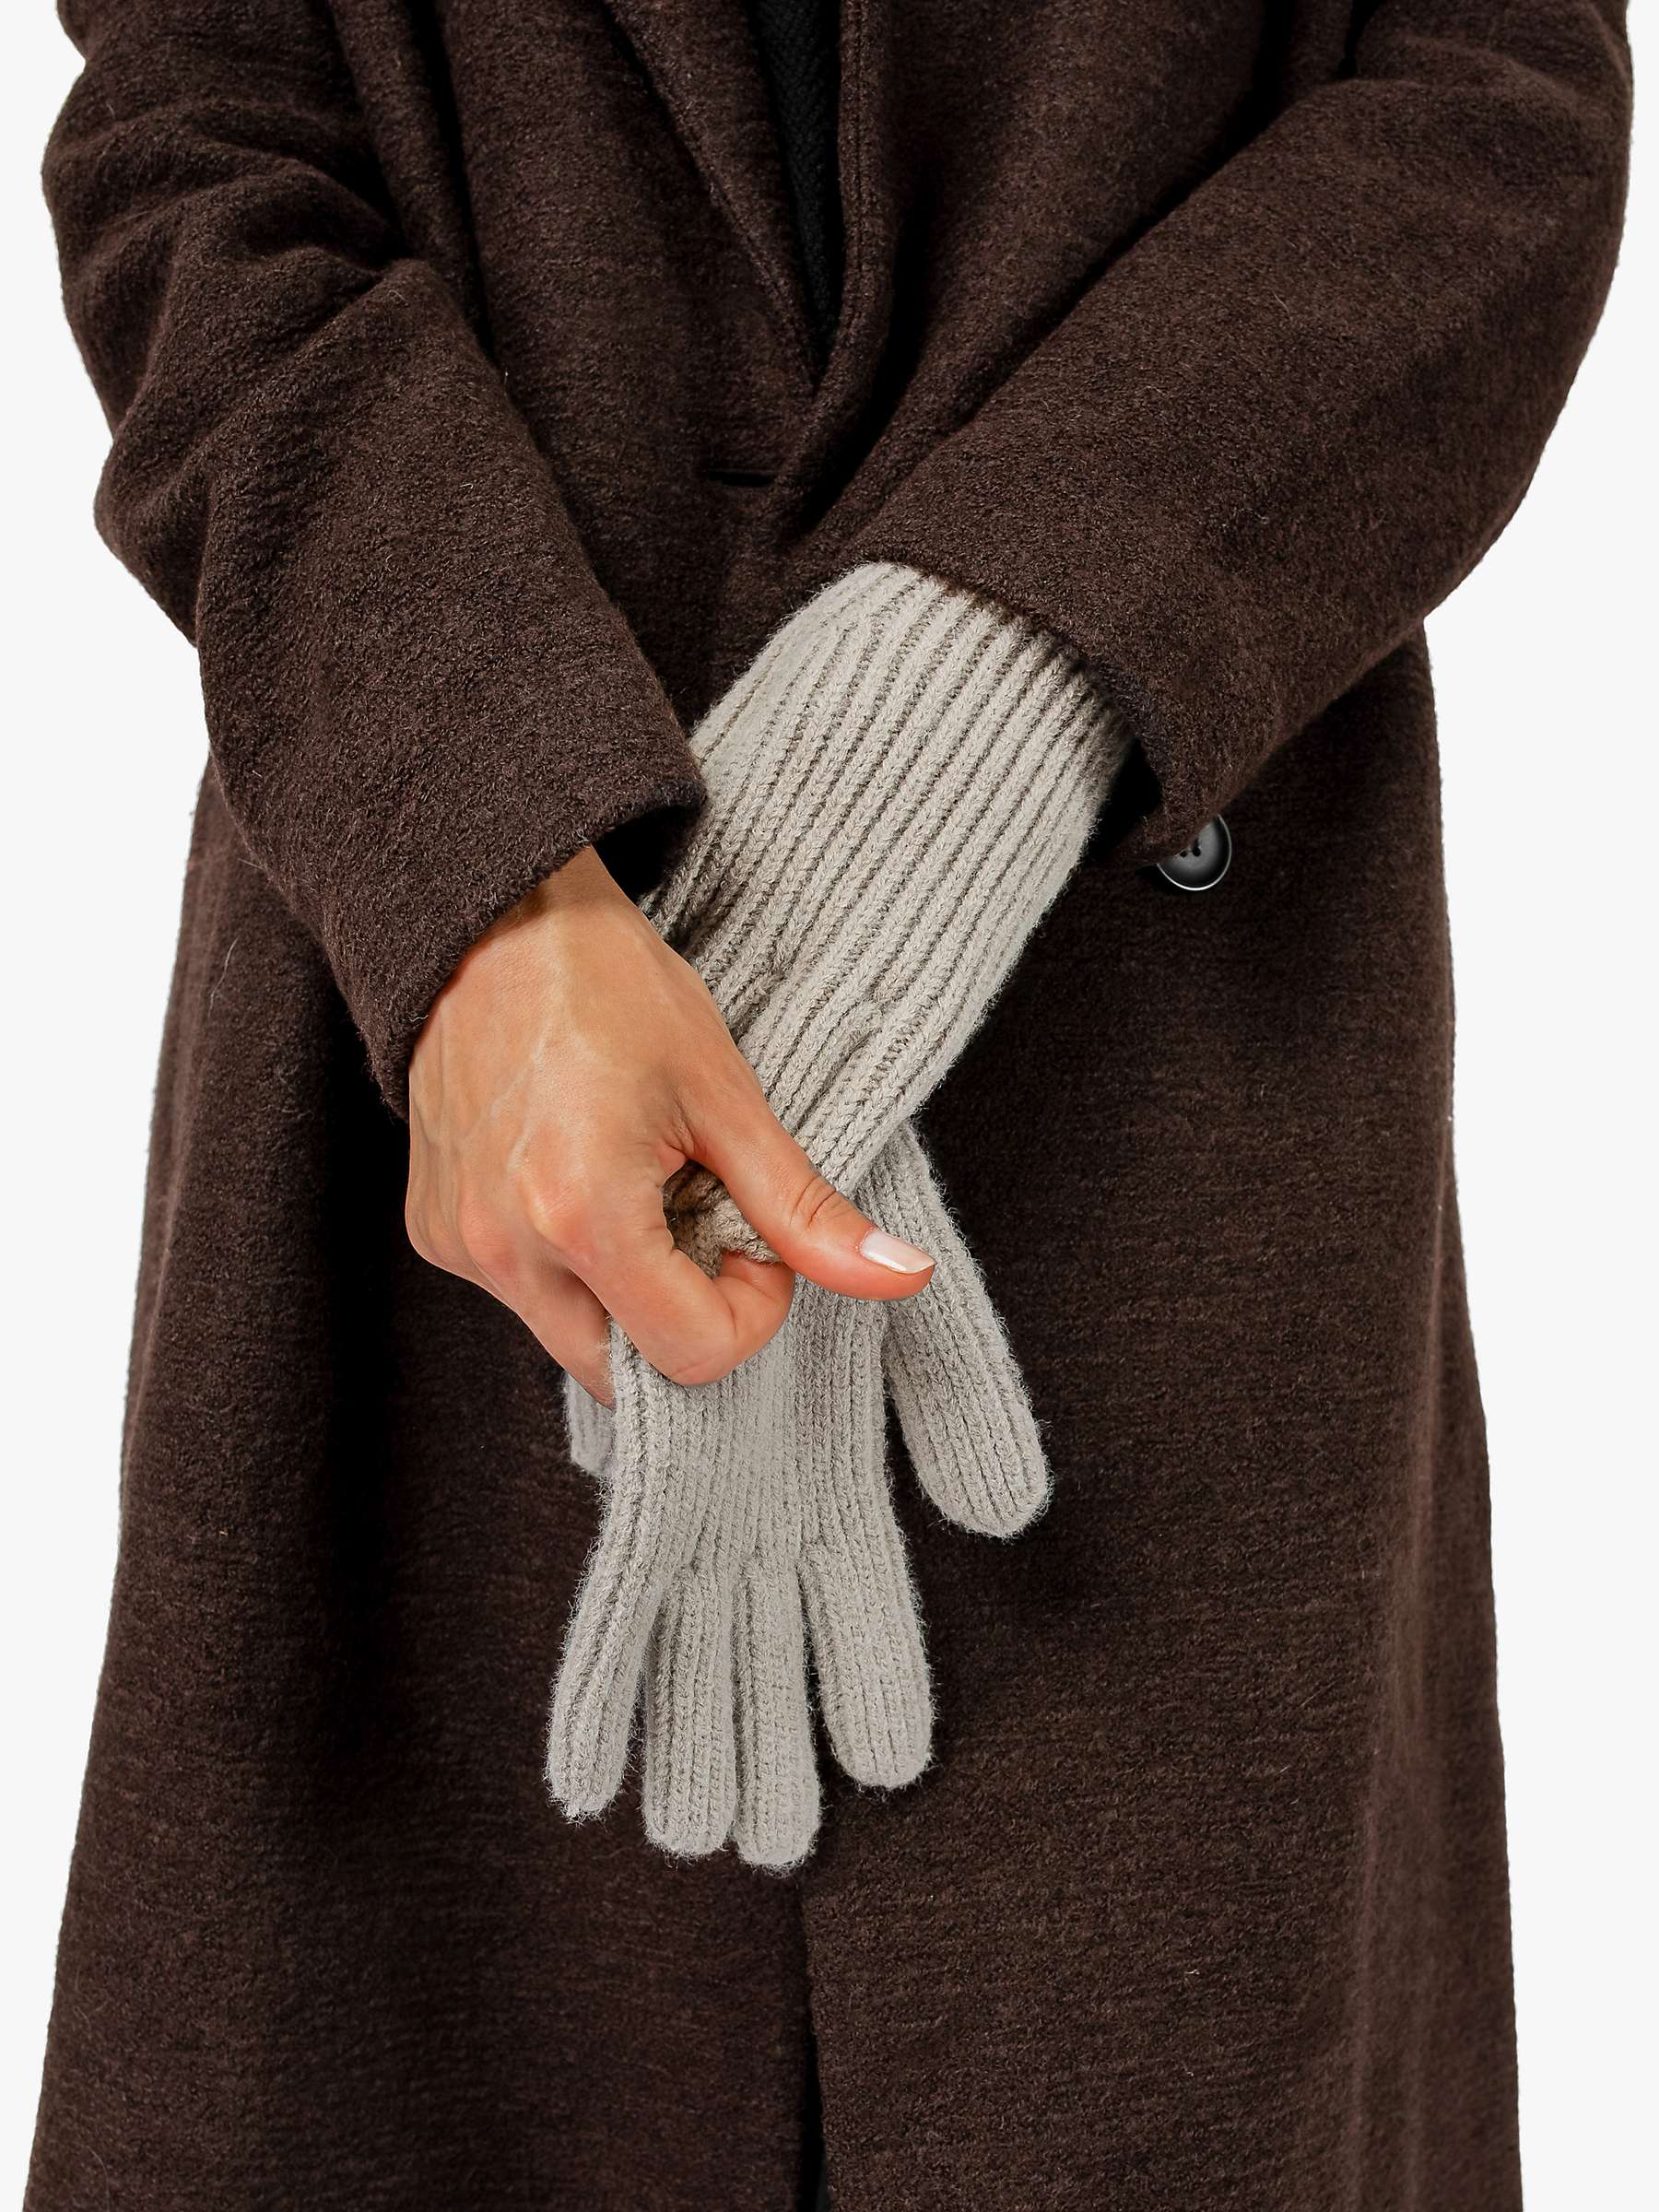 Buy Bloom & Bay Cove Knitted Gloves Online at johnlewis.com